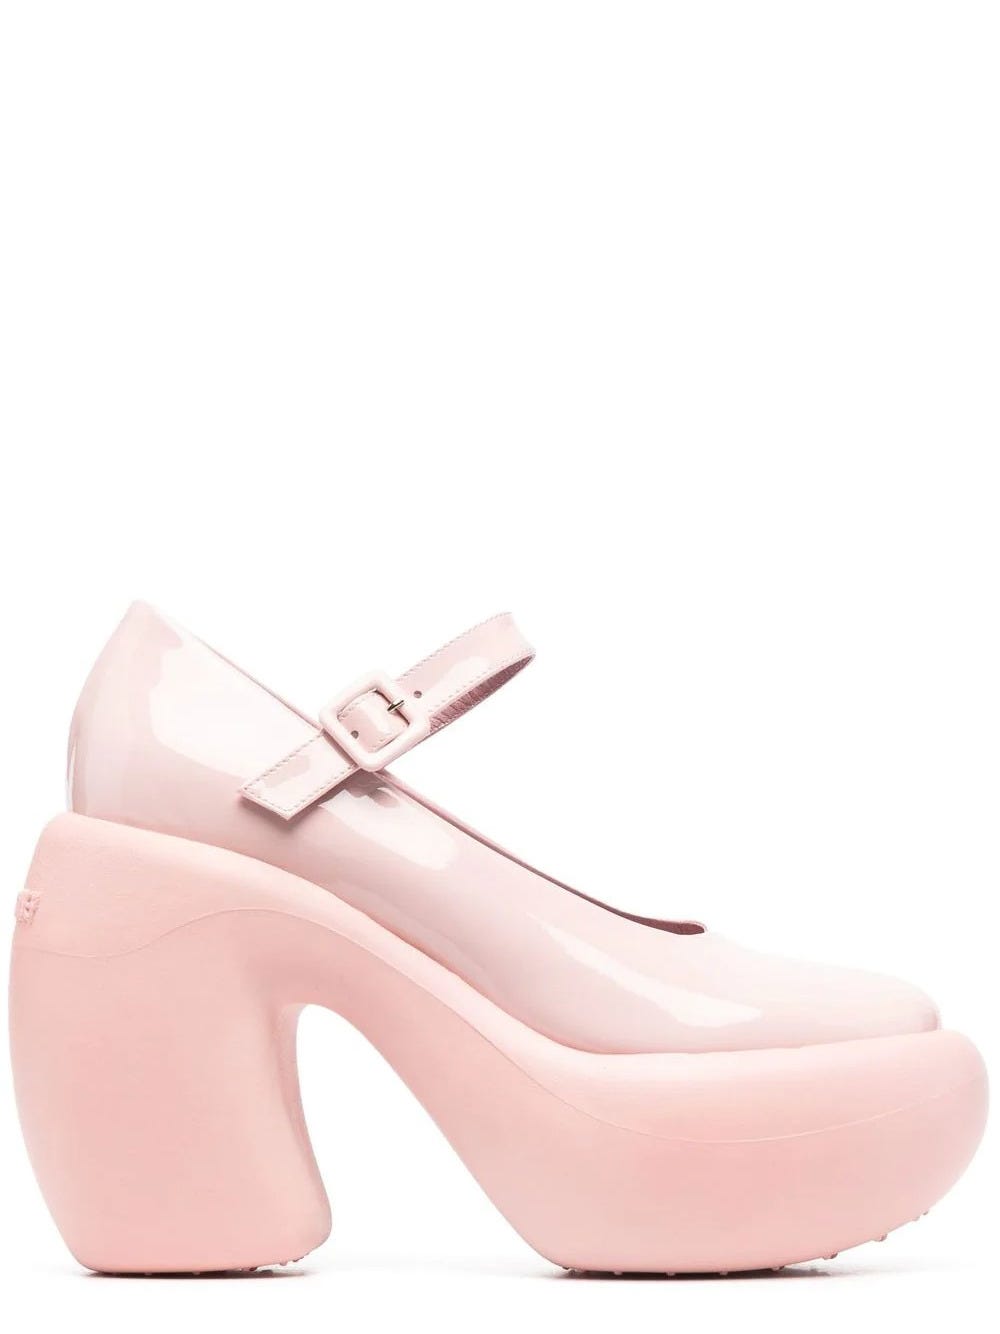 HAUS OF HONEY GLOSSY PINK PUMPS WITH WIDE HEEL AND PLATFORM